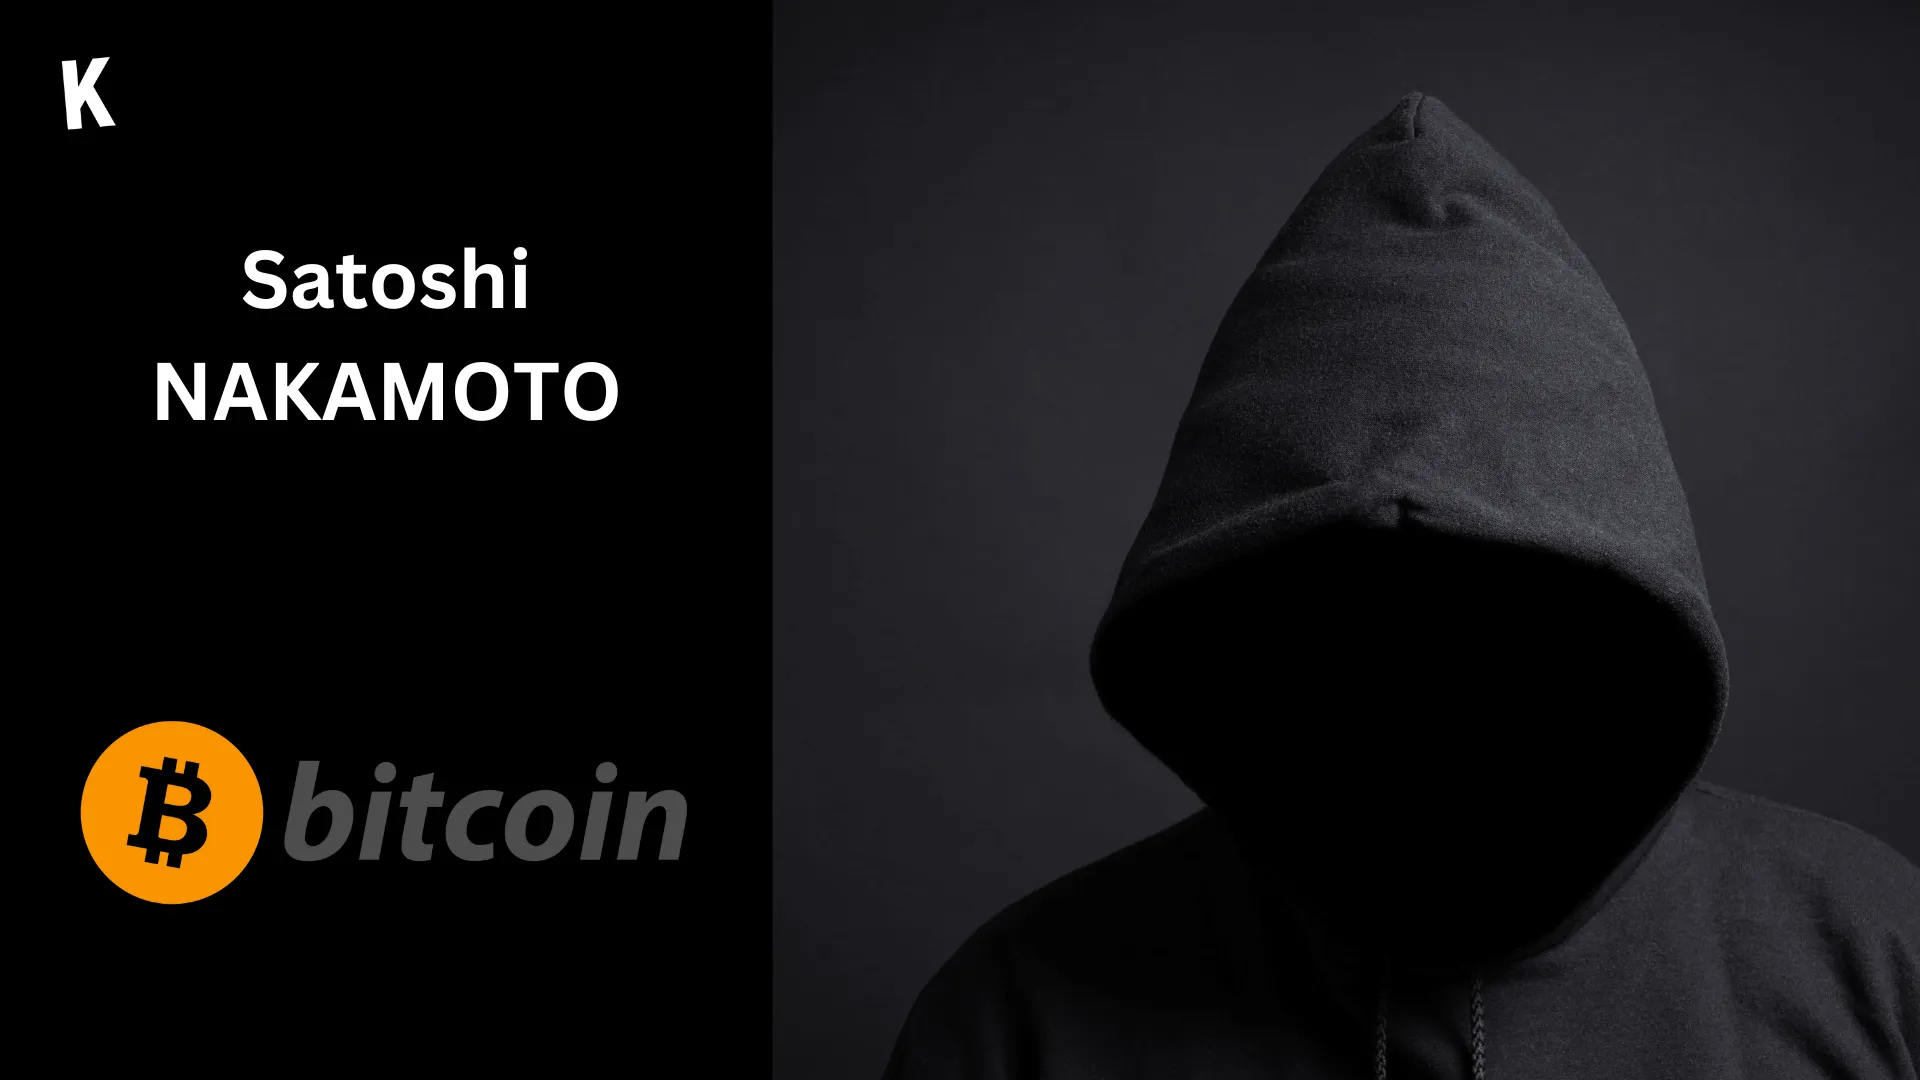 Anonymous person to symbolize Satoshi Nakamoto, with a Bitcoin logo on the left